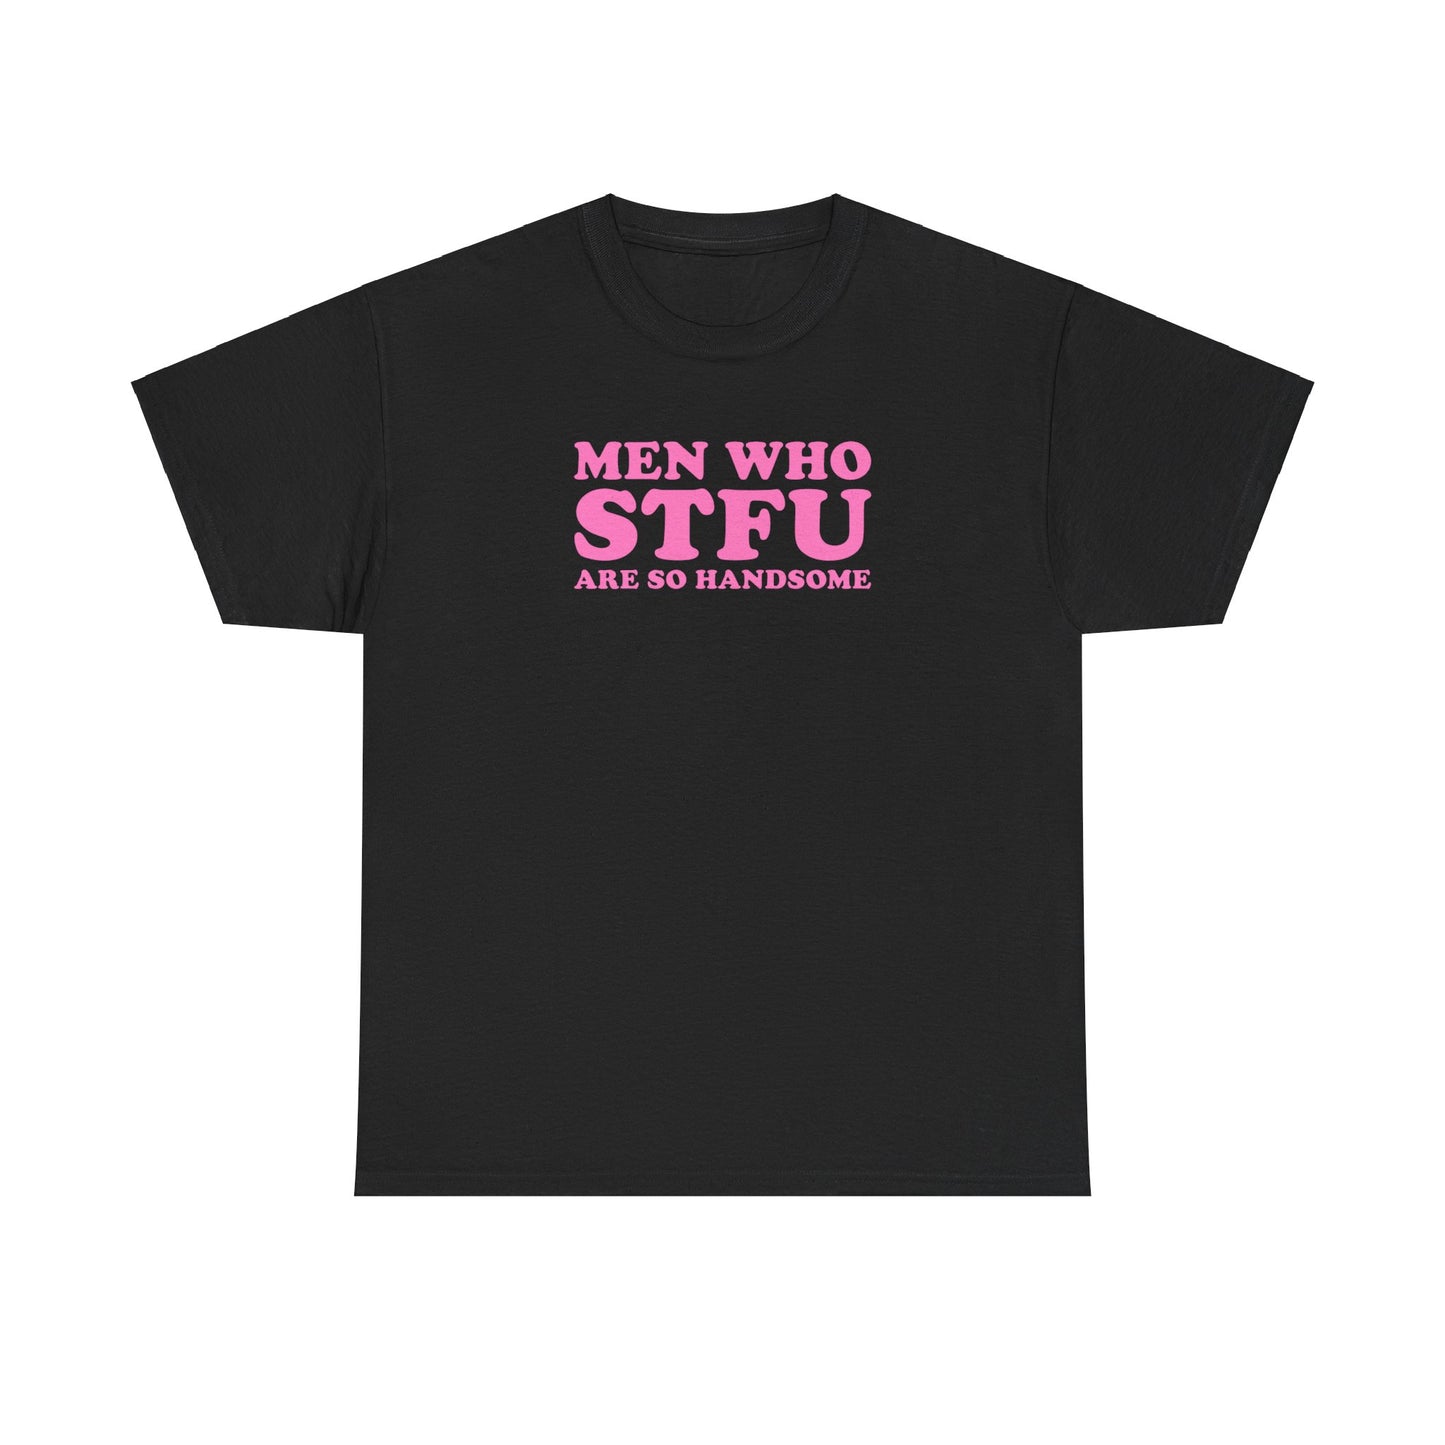 MEN WHO STFU ARE SO HANDSOME T-SHIRT